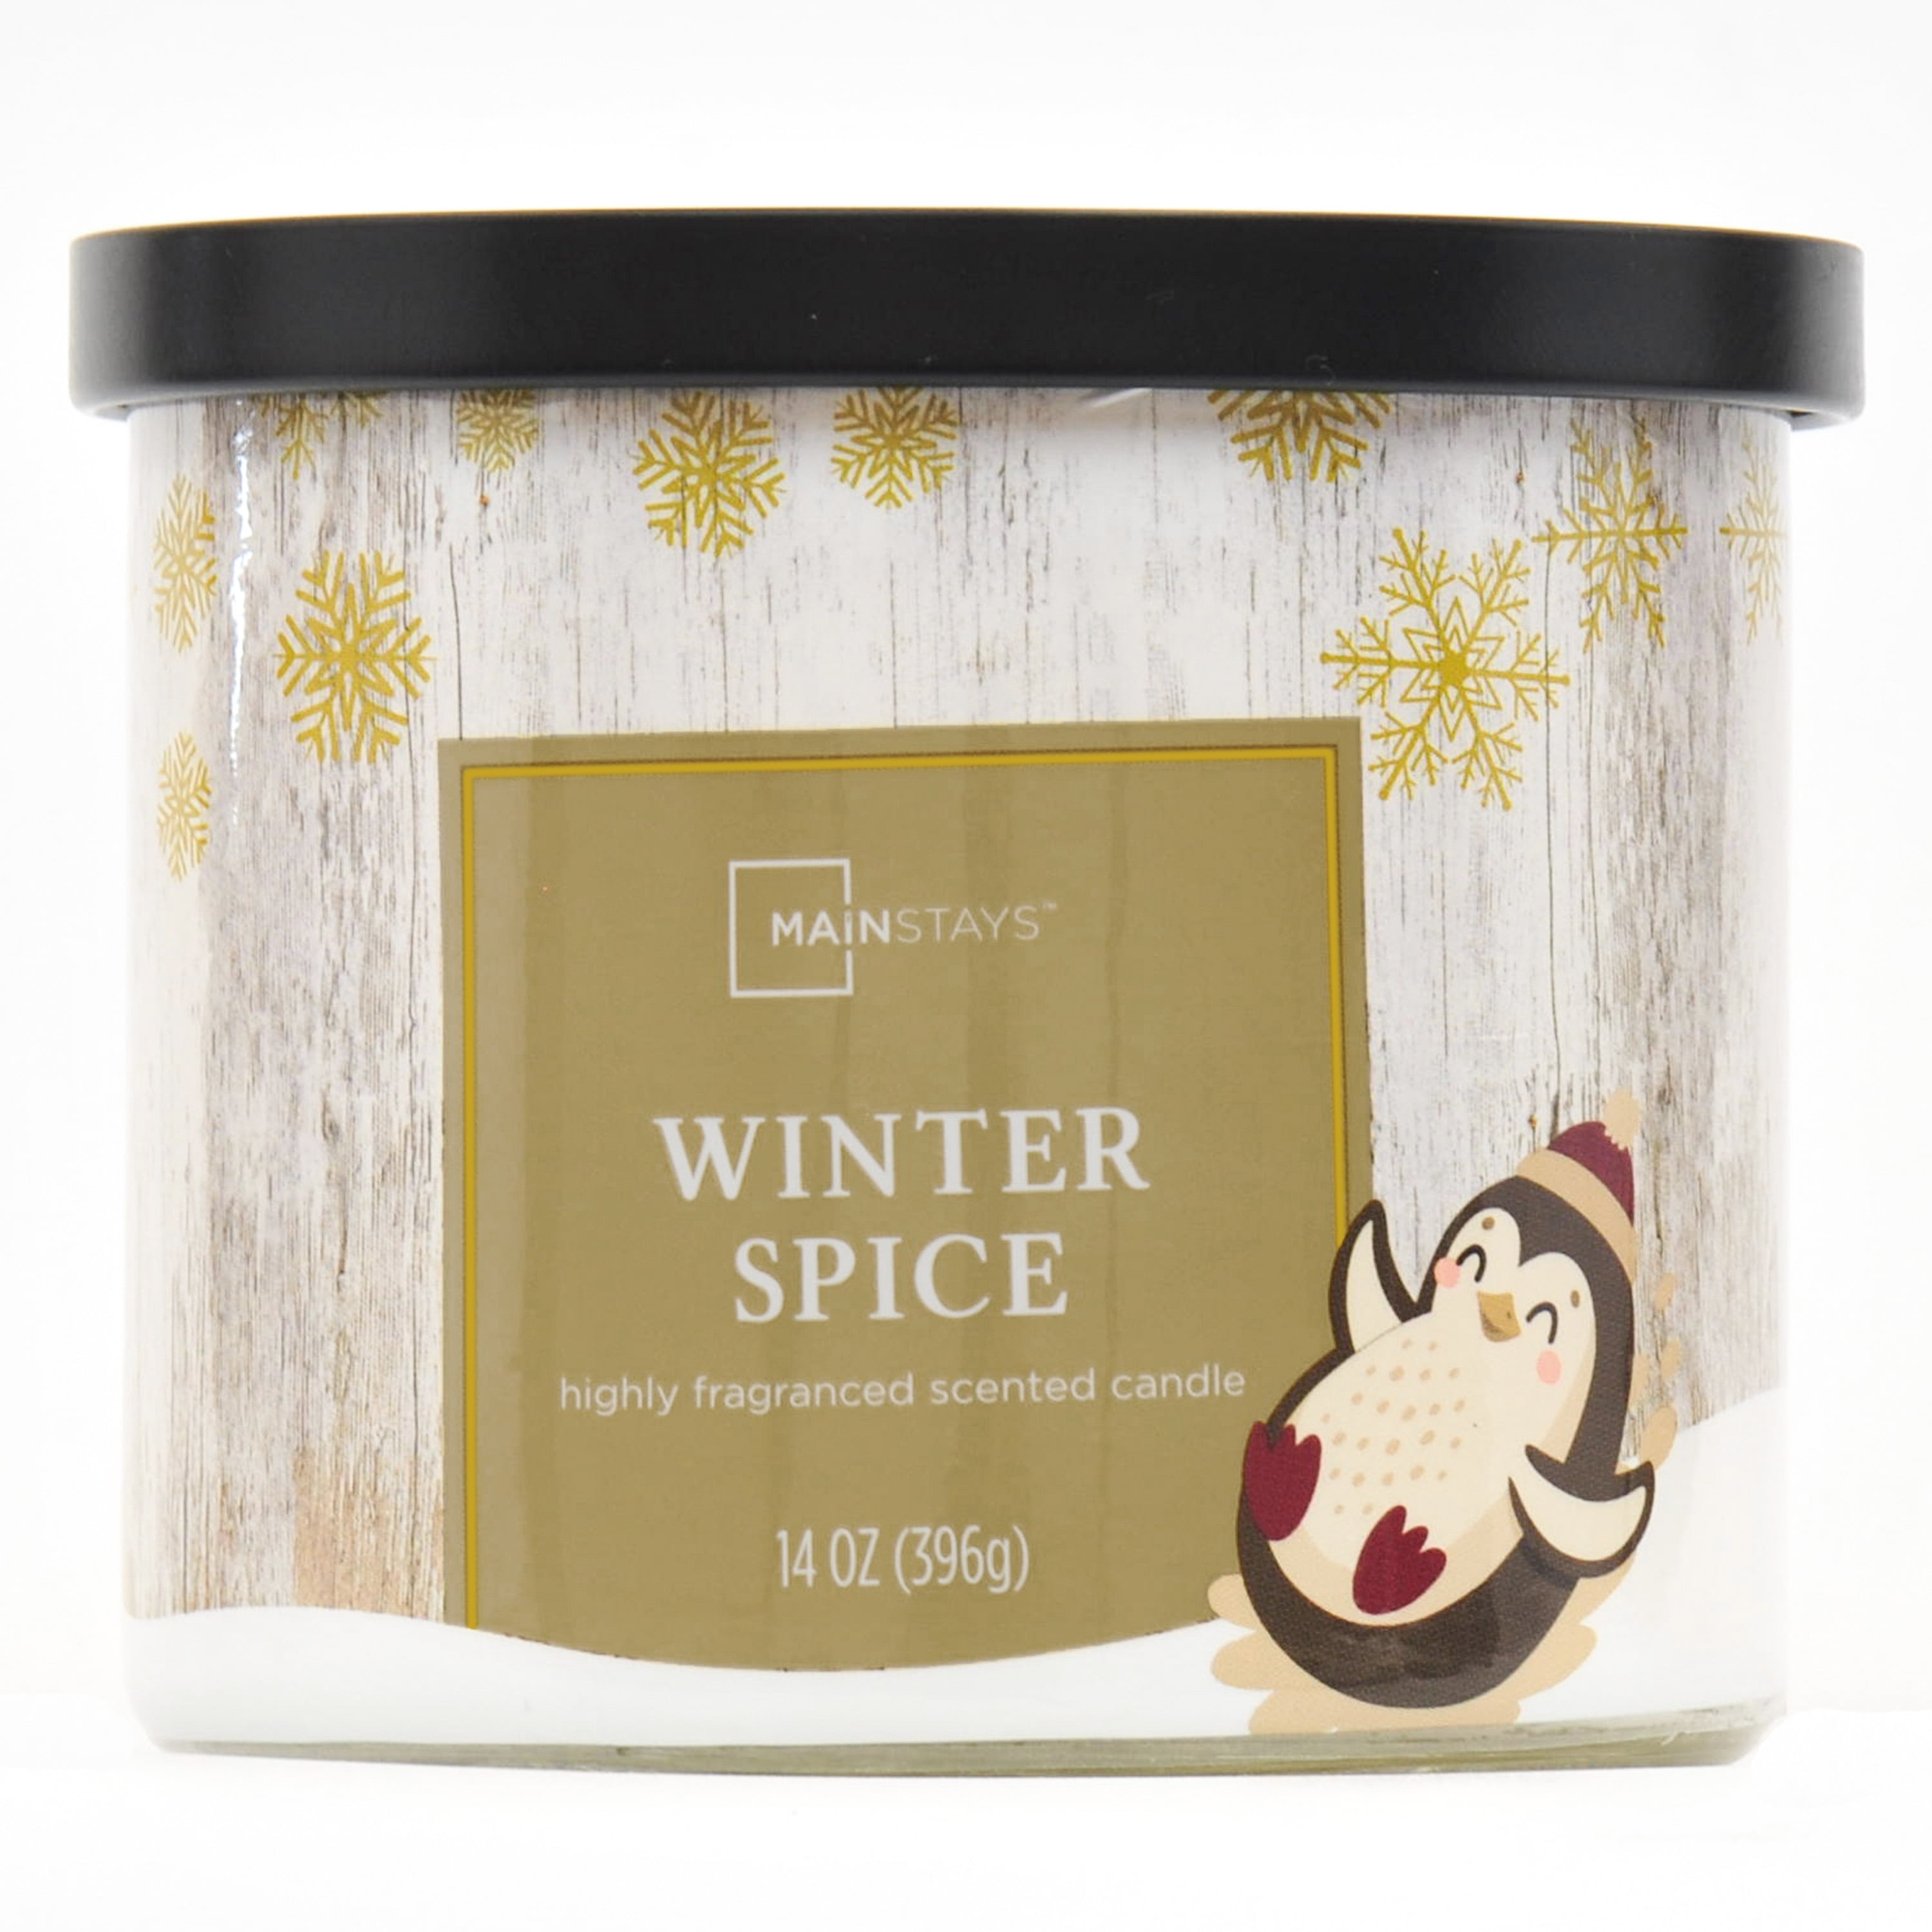 Mainstays Penguin Wrapped 3-Wicked Scented Winter Spice candle, 14-Ounce